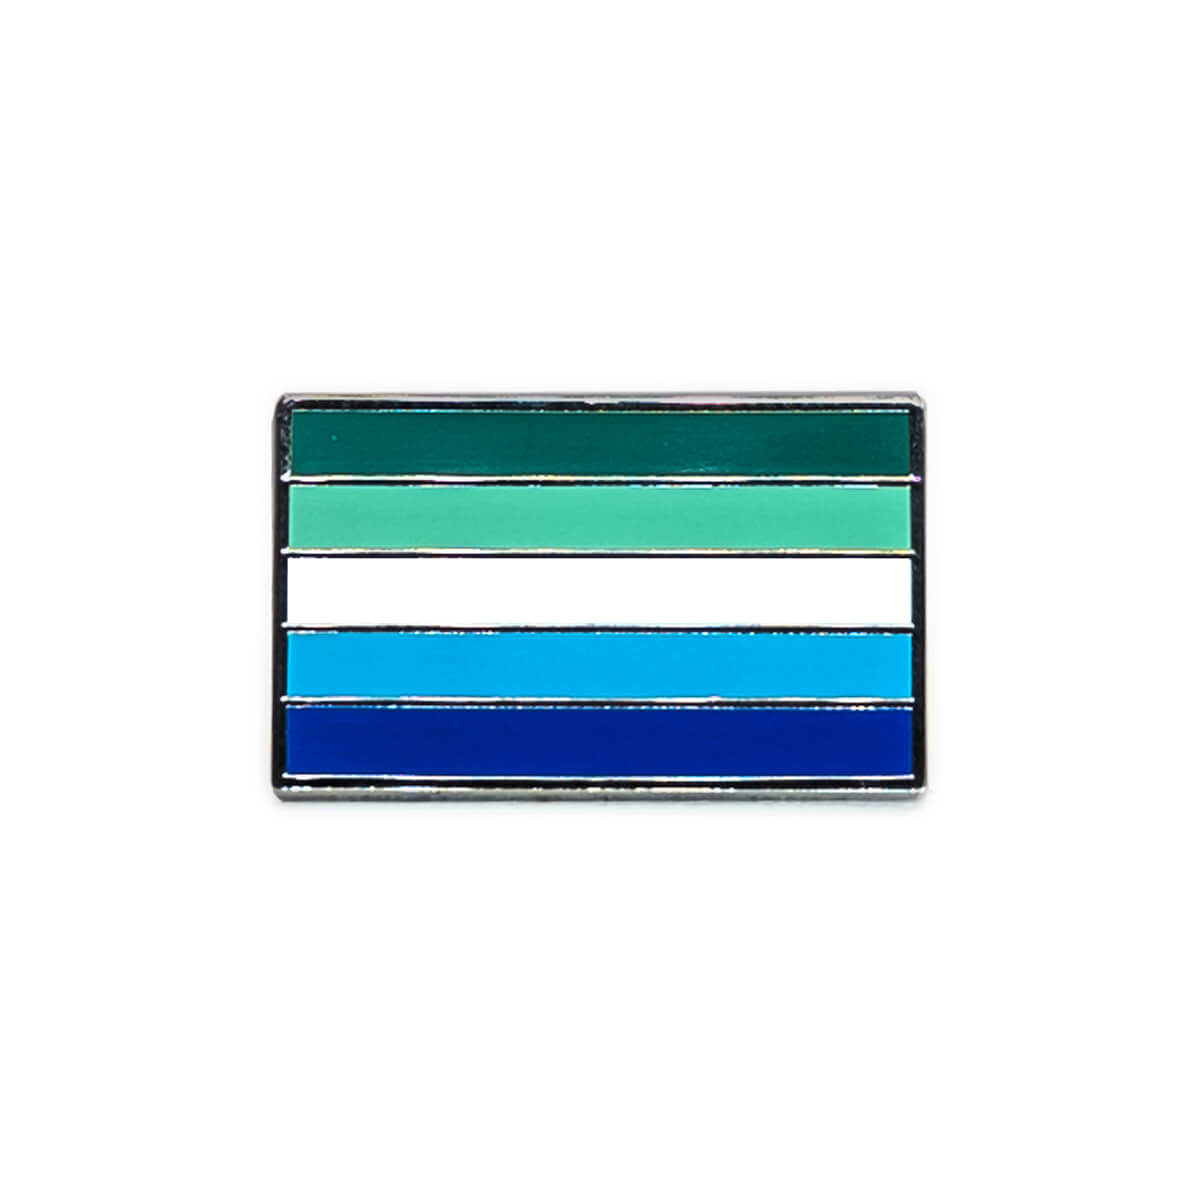 An image of a MLM flag pin